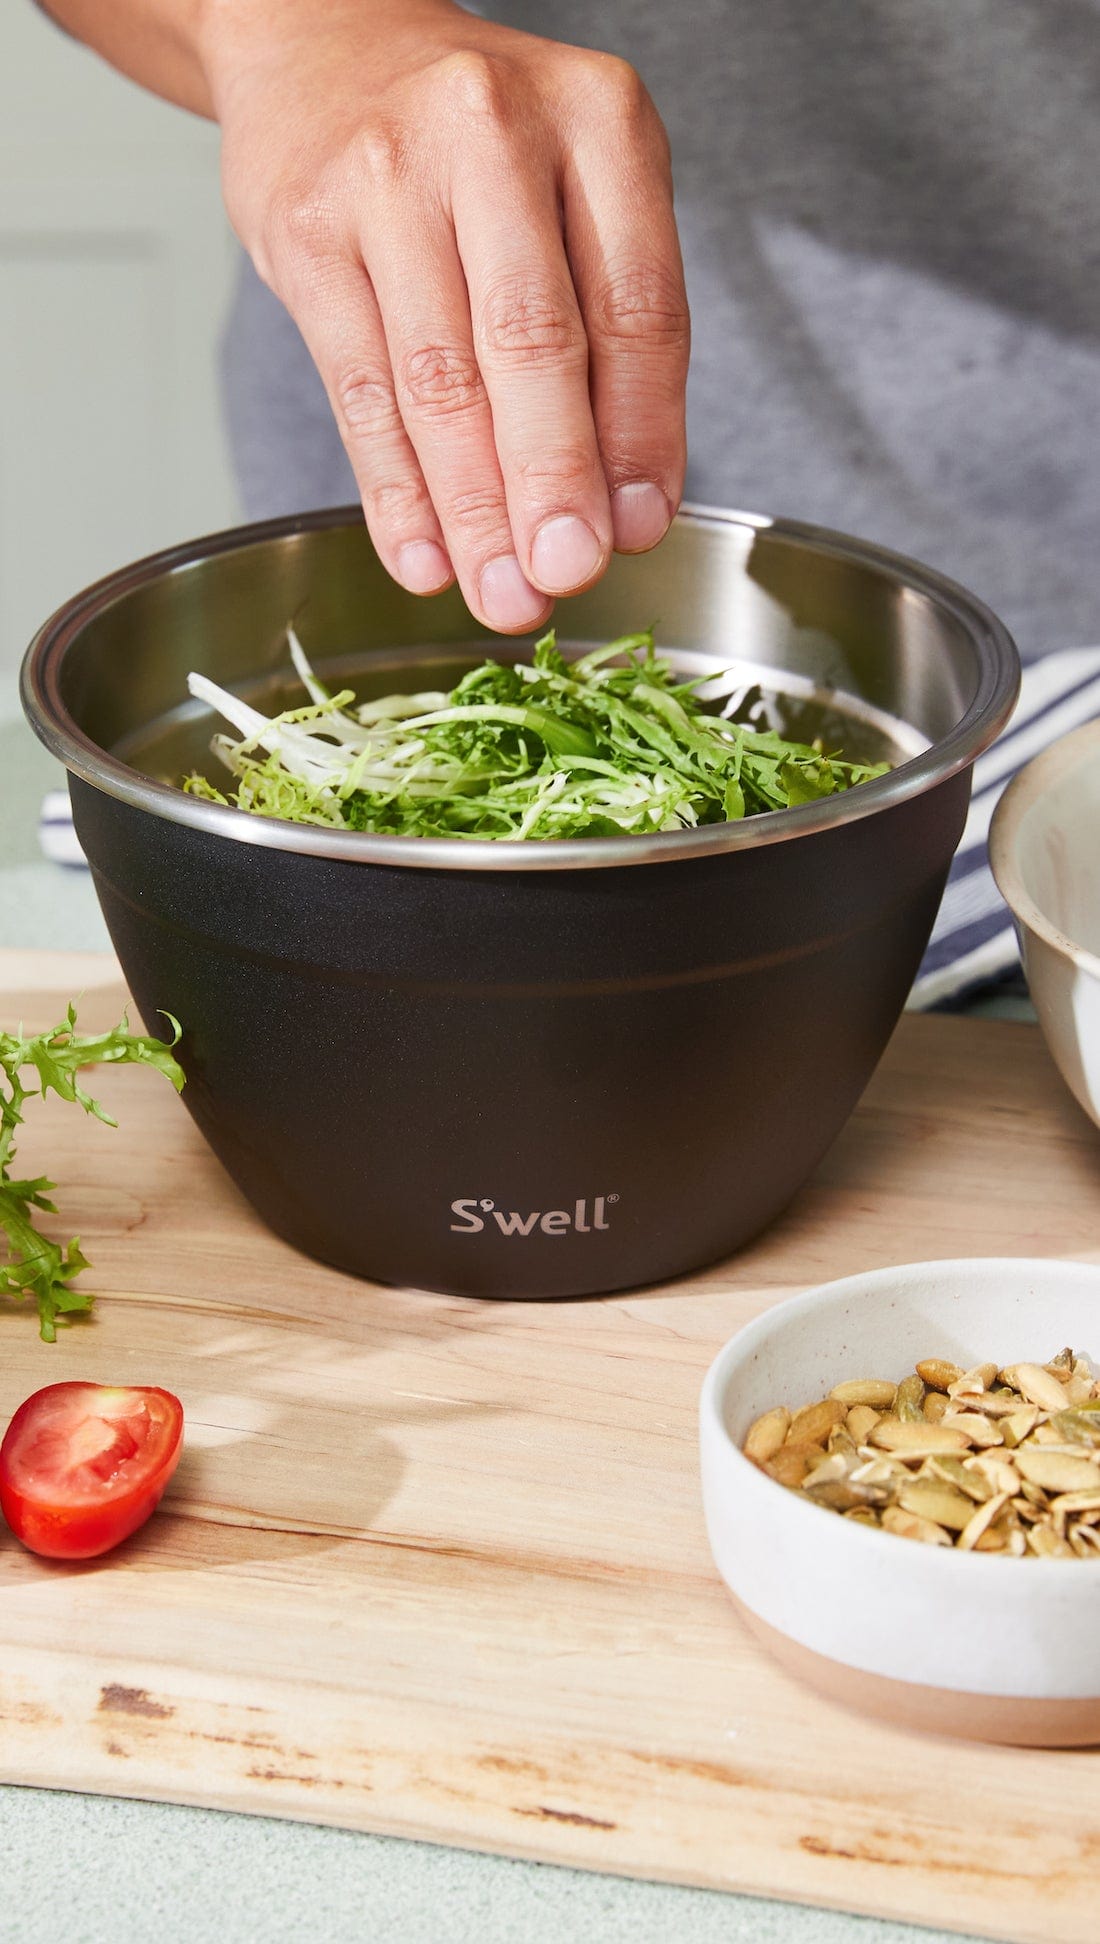 S'well Stainless Steel Food Bowls, S'well Eats Food Bowl